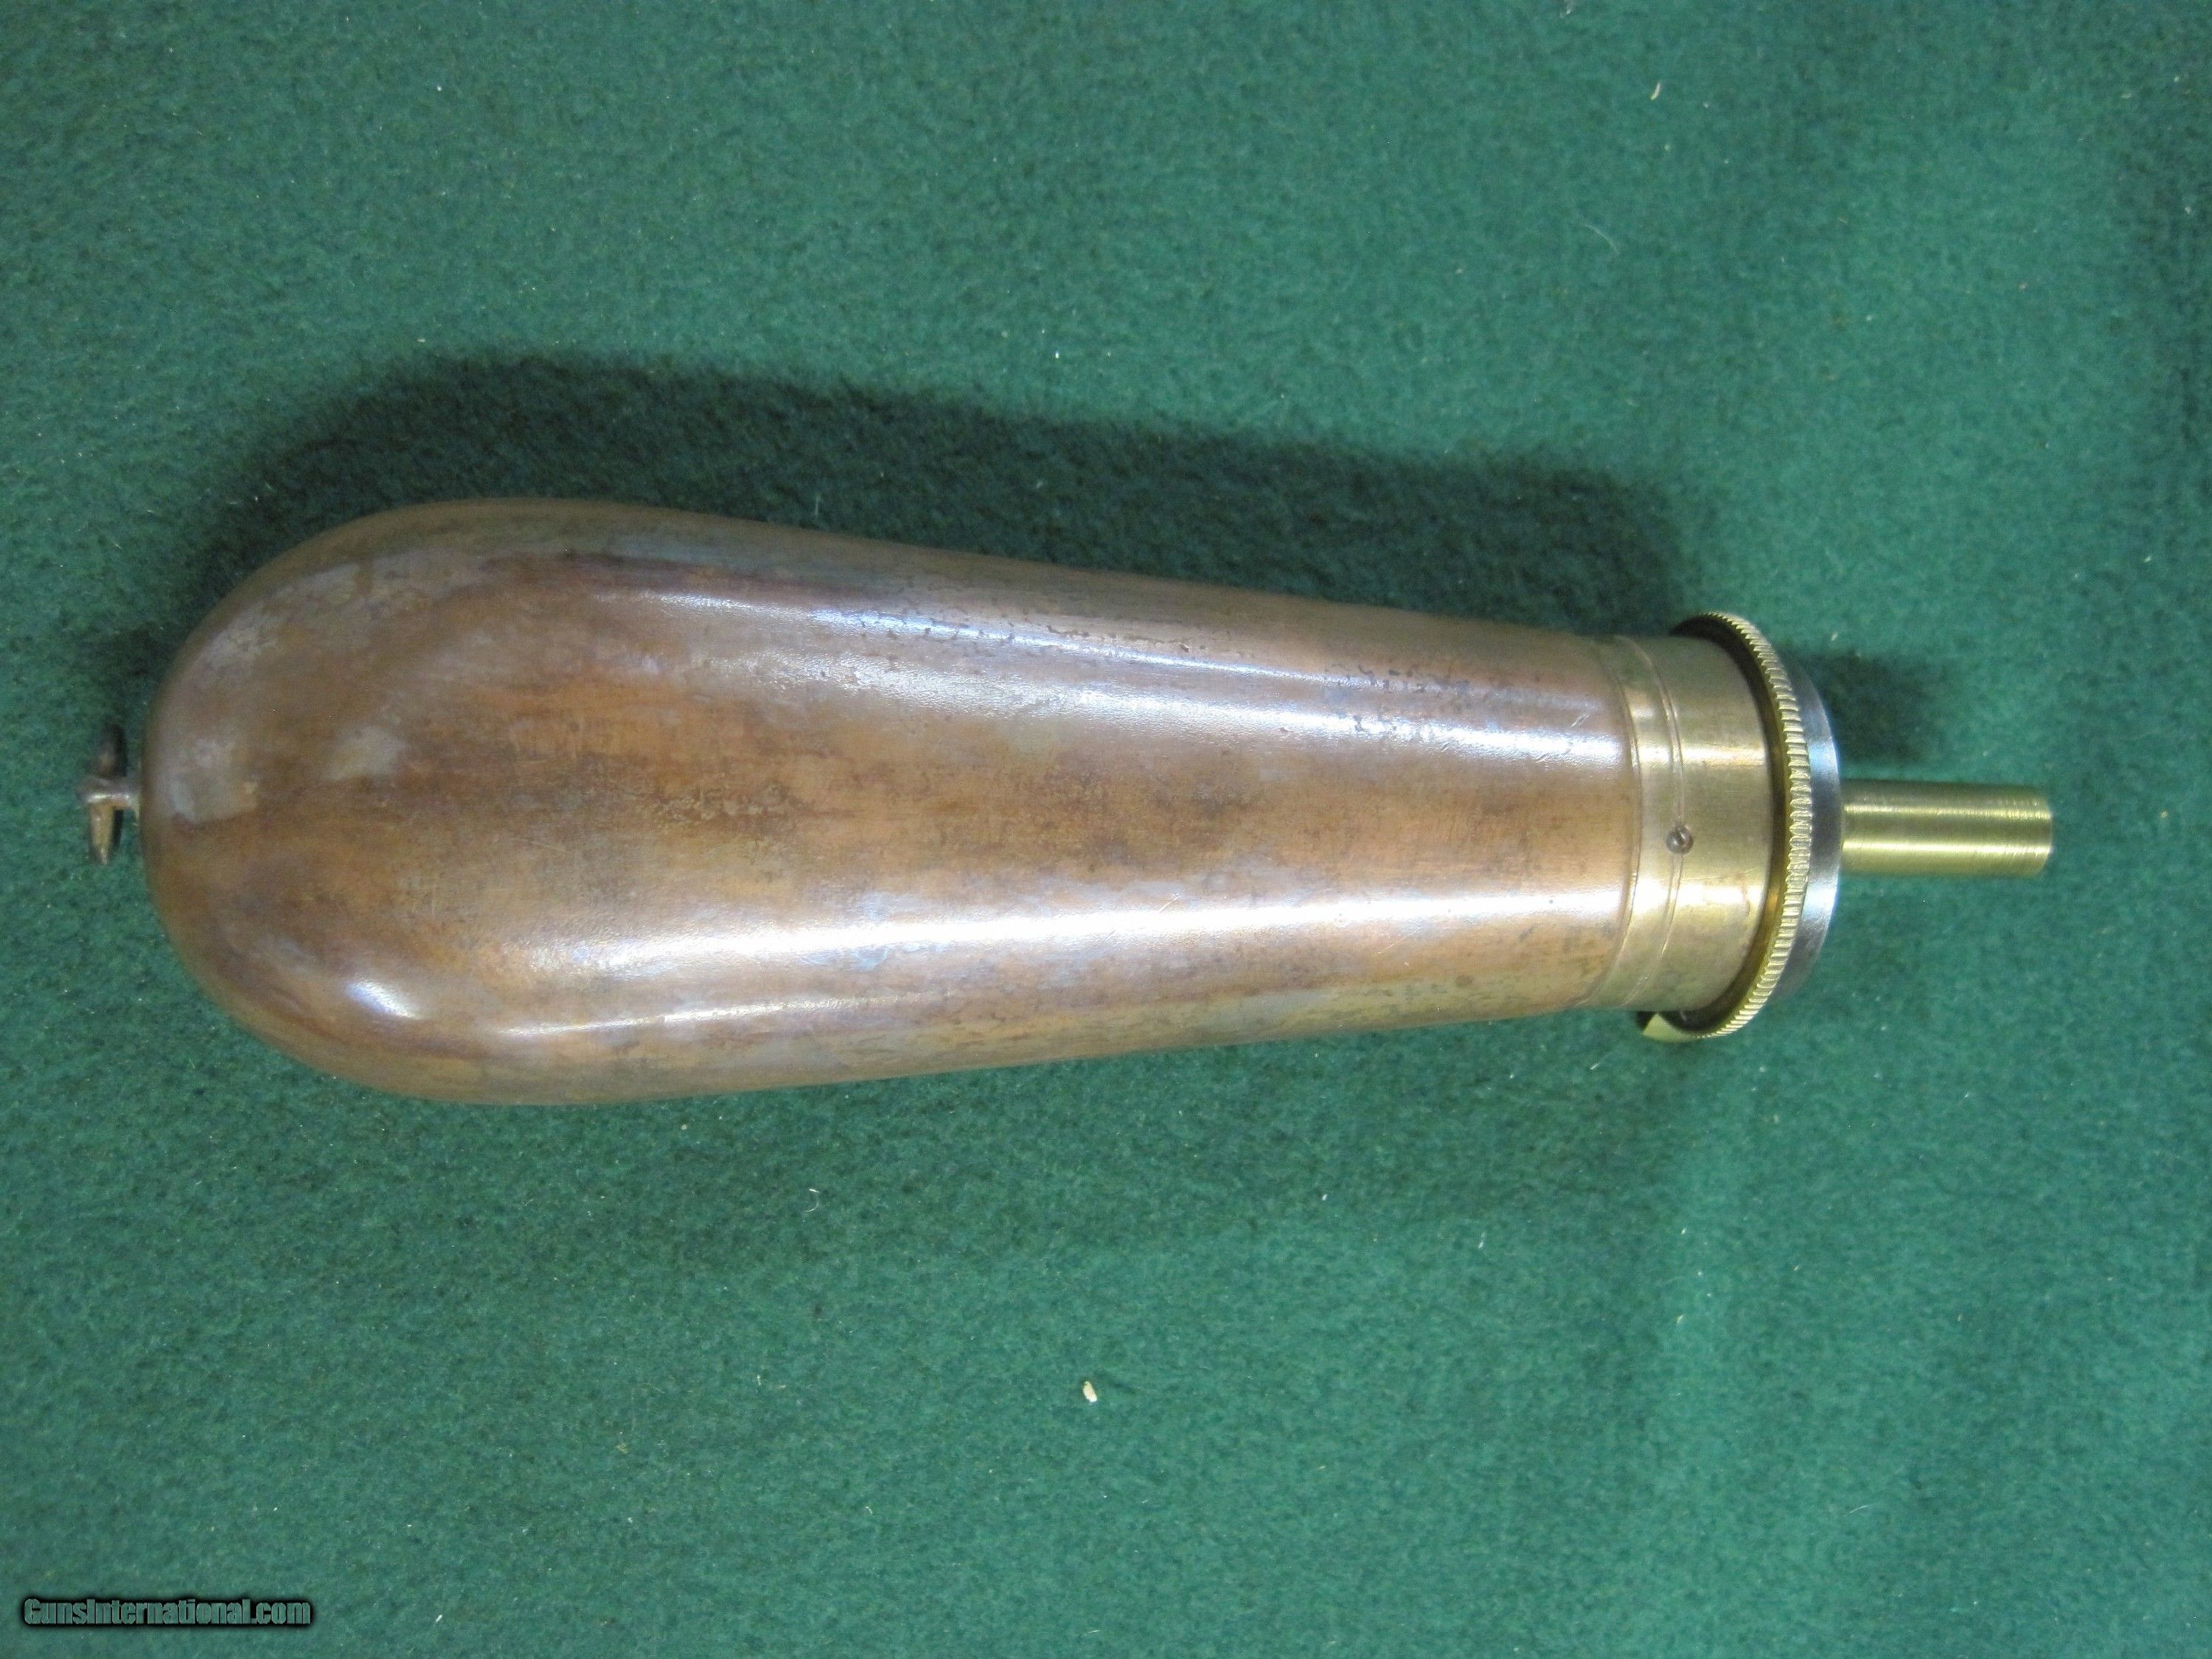 Spout made by James Dixon & Sons, Powder Flask